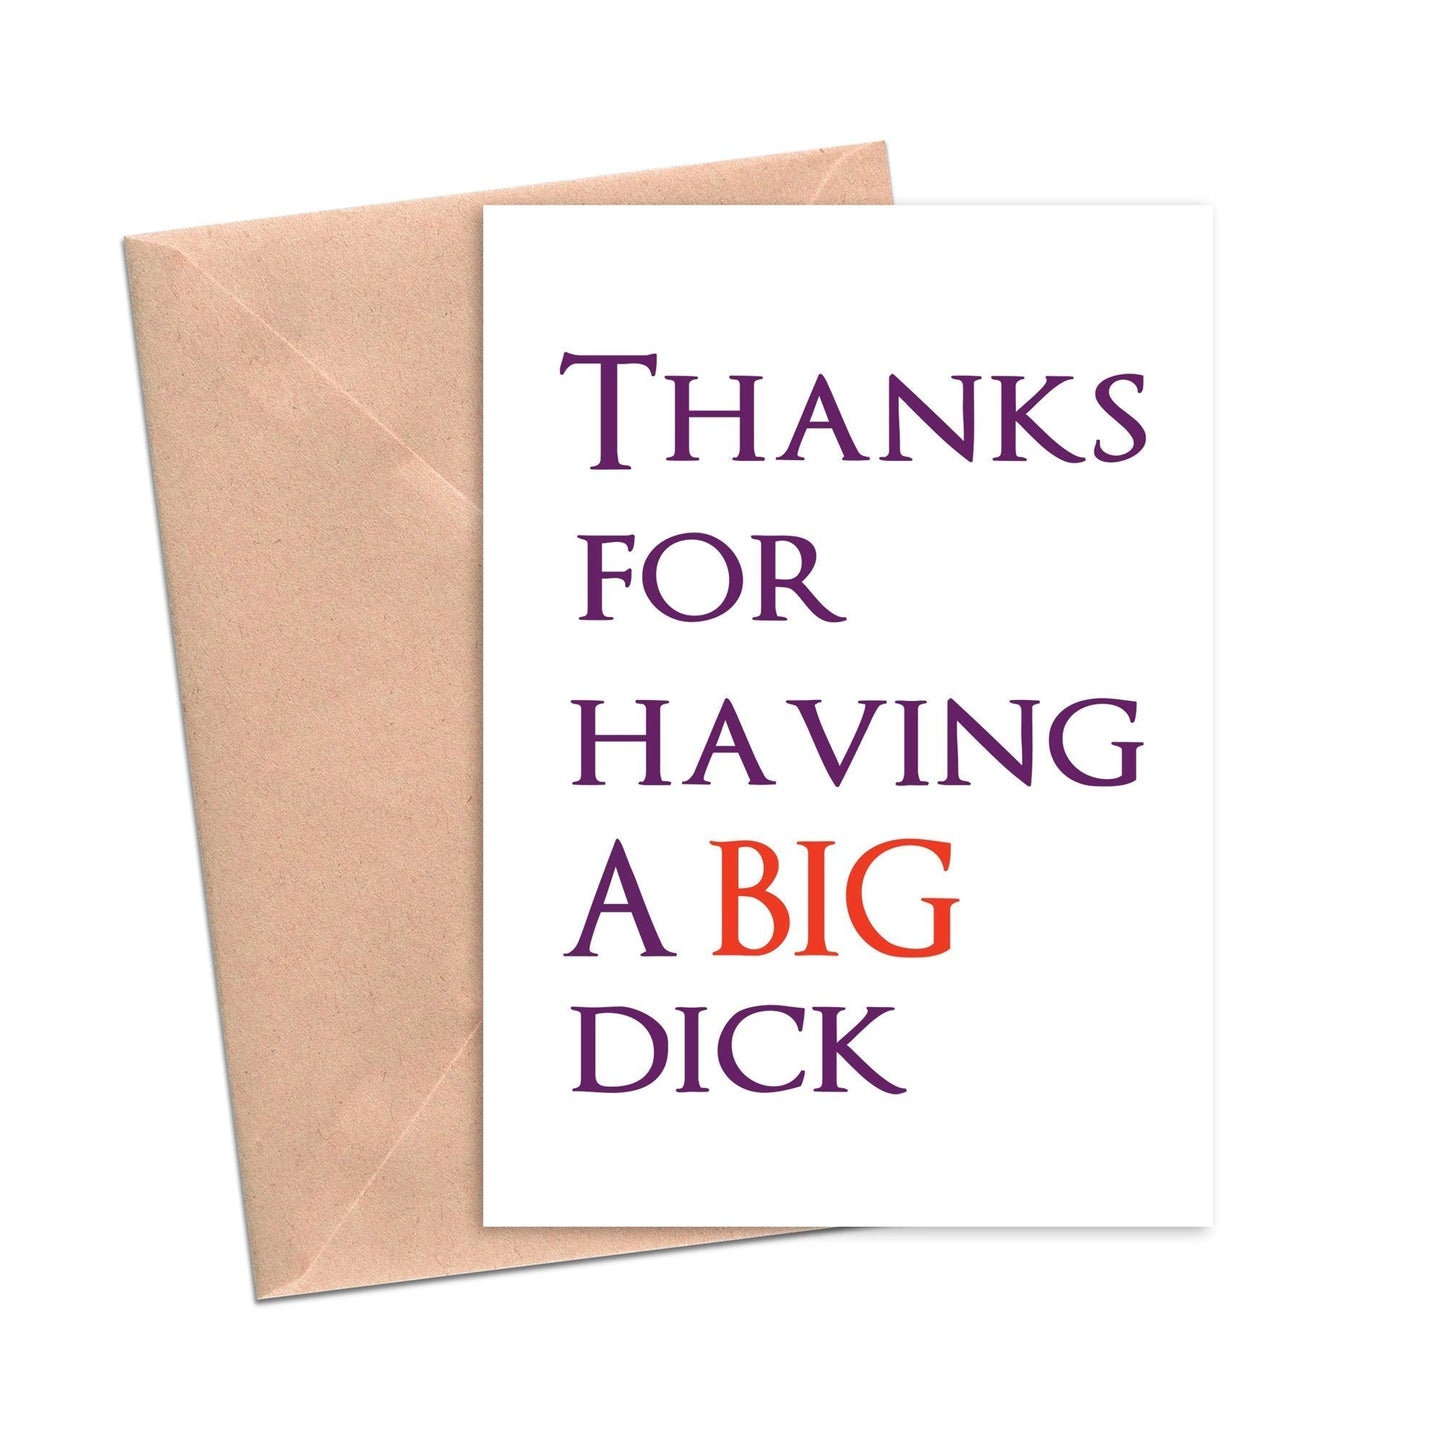 Funny Love Card Thanks for Having a Big D*ck-Love Cards-Crimson and Clover Studio